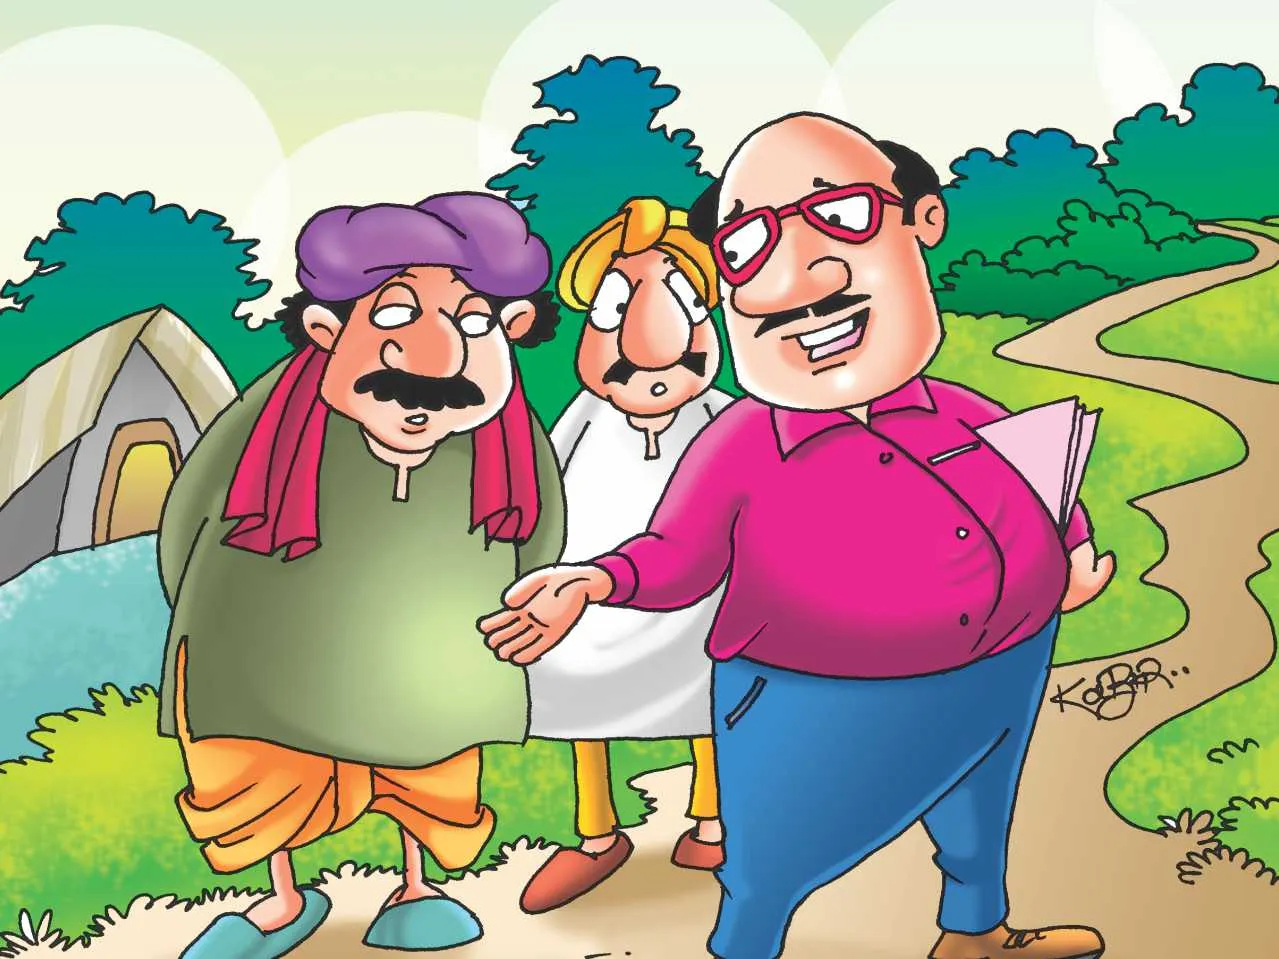 Engineer with villagers cartoon image